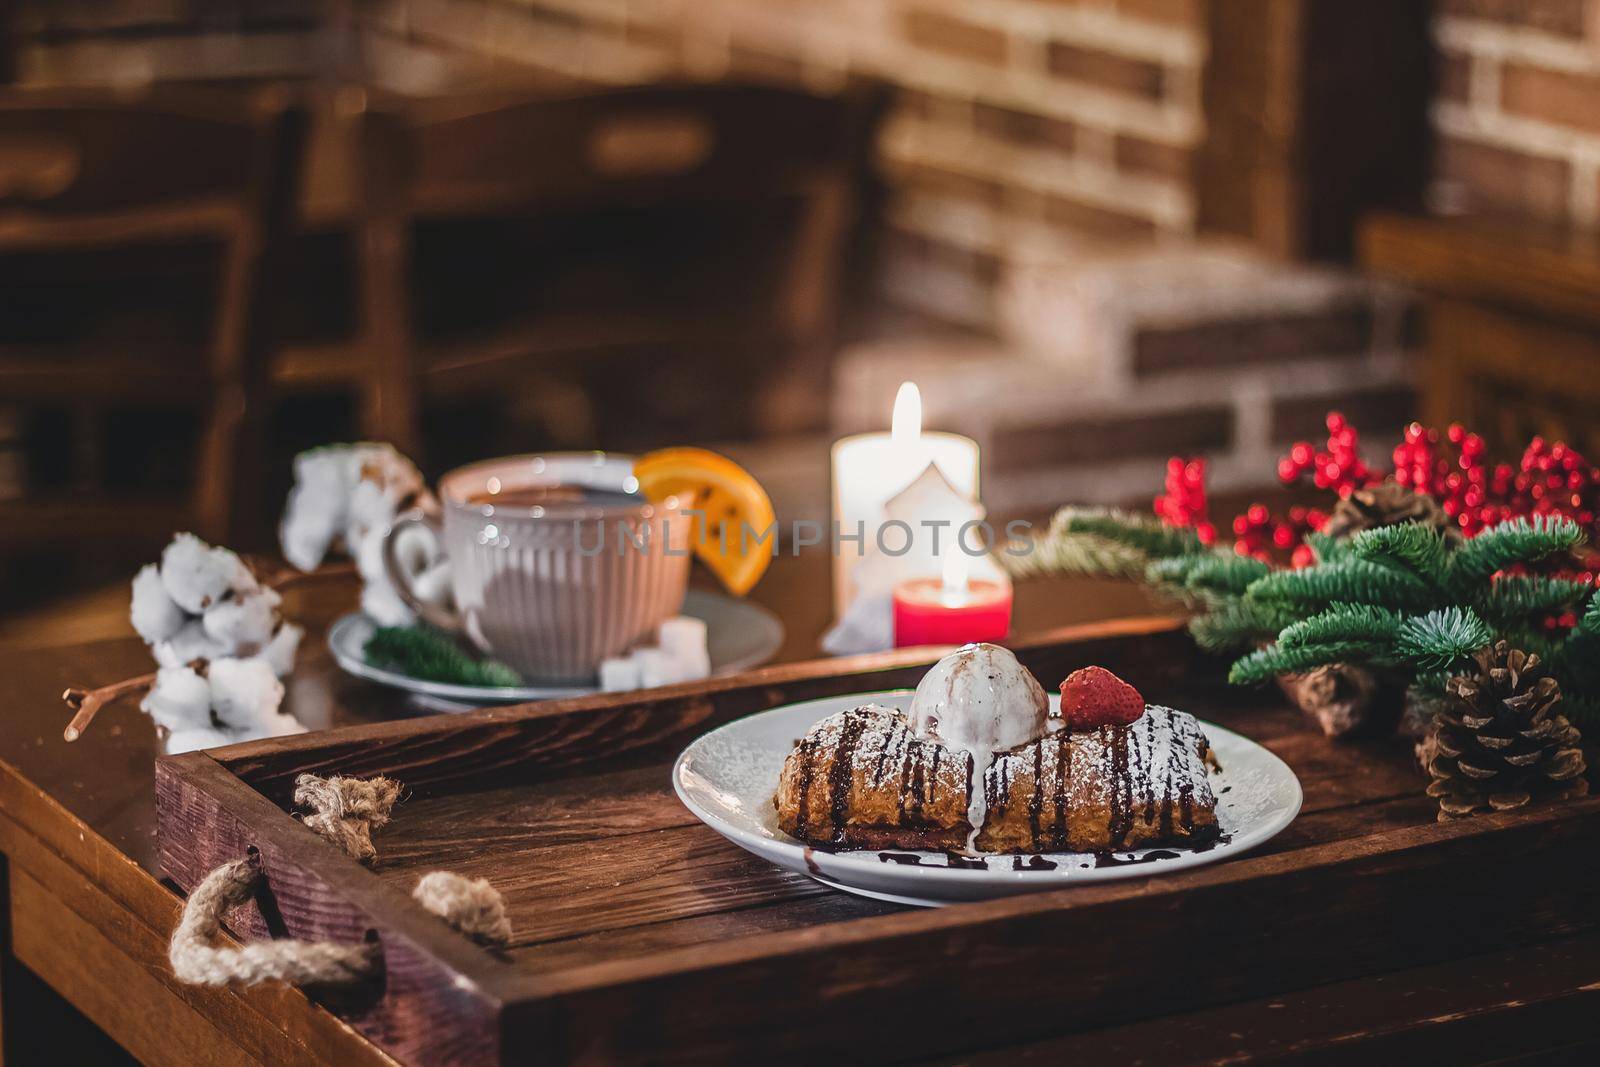 Closeup of a strudel with a strawberry on a Christmas plate near bamboo branch. Christmas breakfast on a wooden table